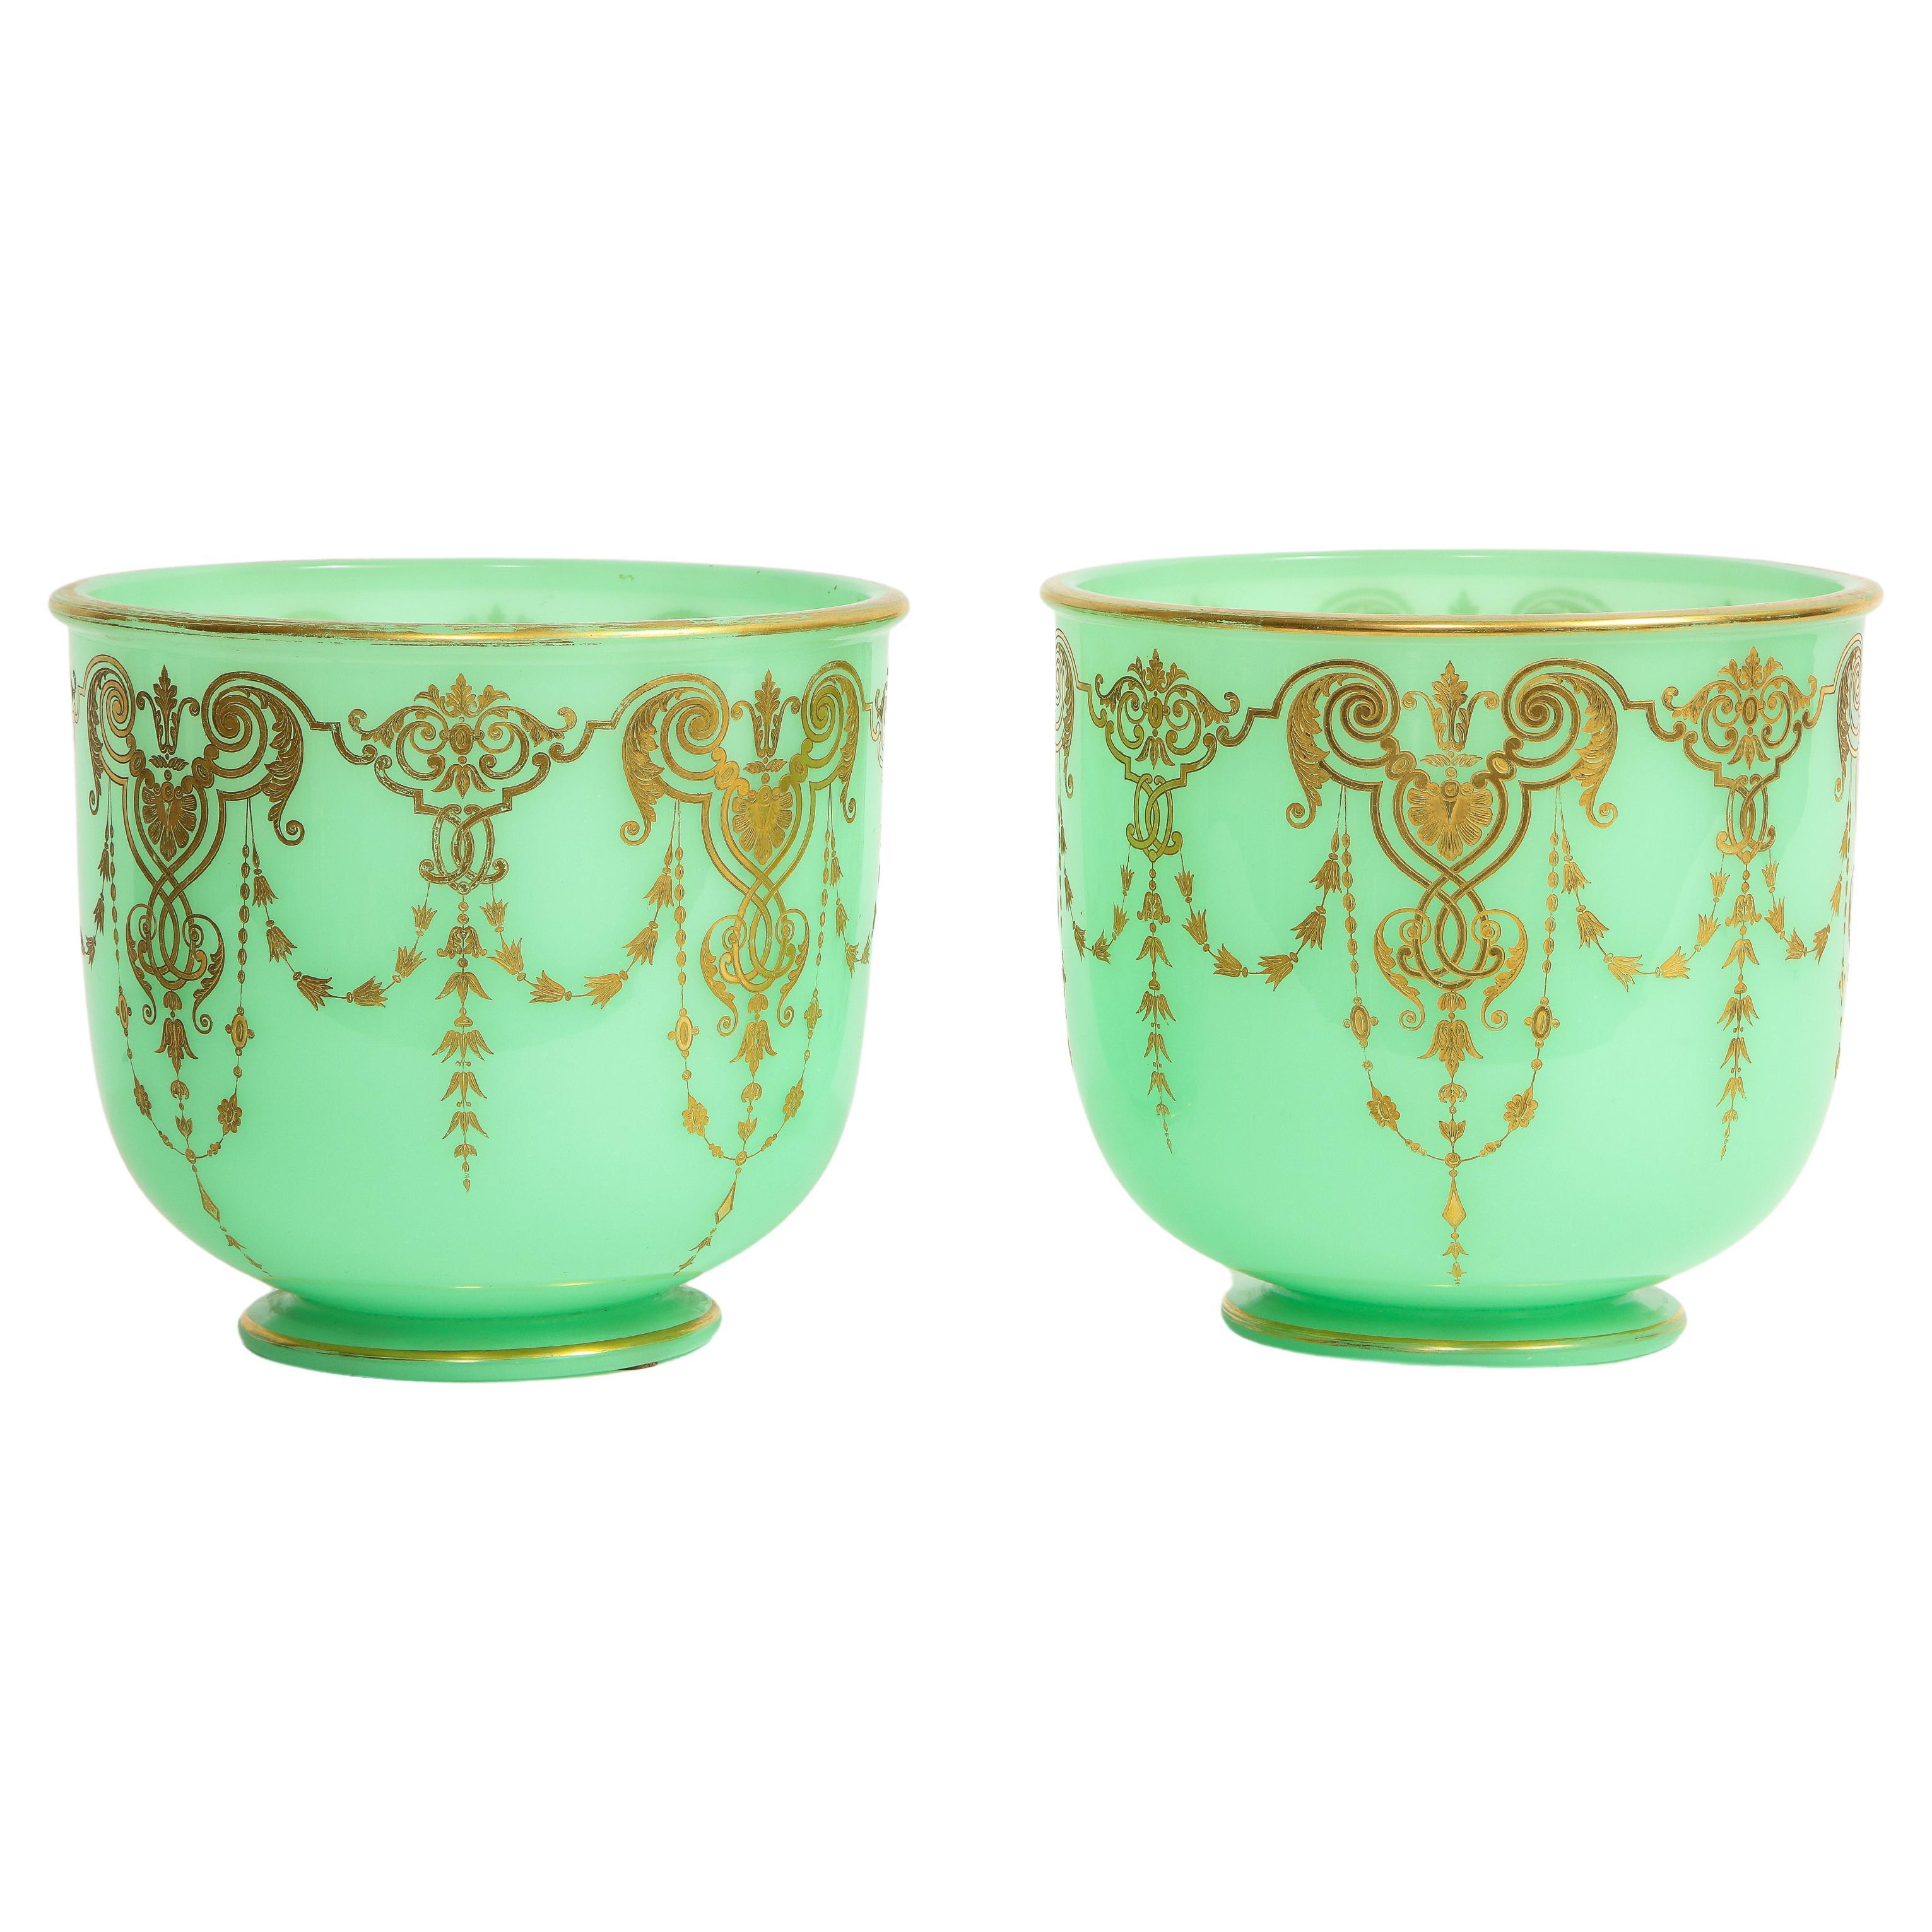 Pair of 19th C. French Green Opaline Crystal Cachepots Engraved Gilt Decoration For Sale